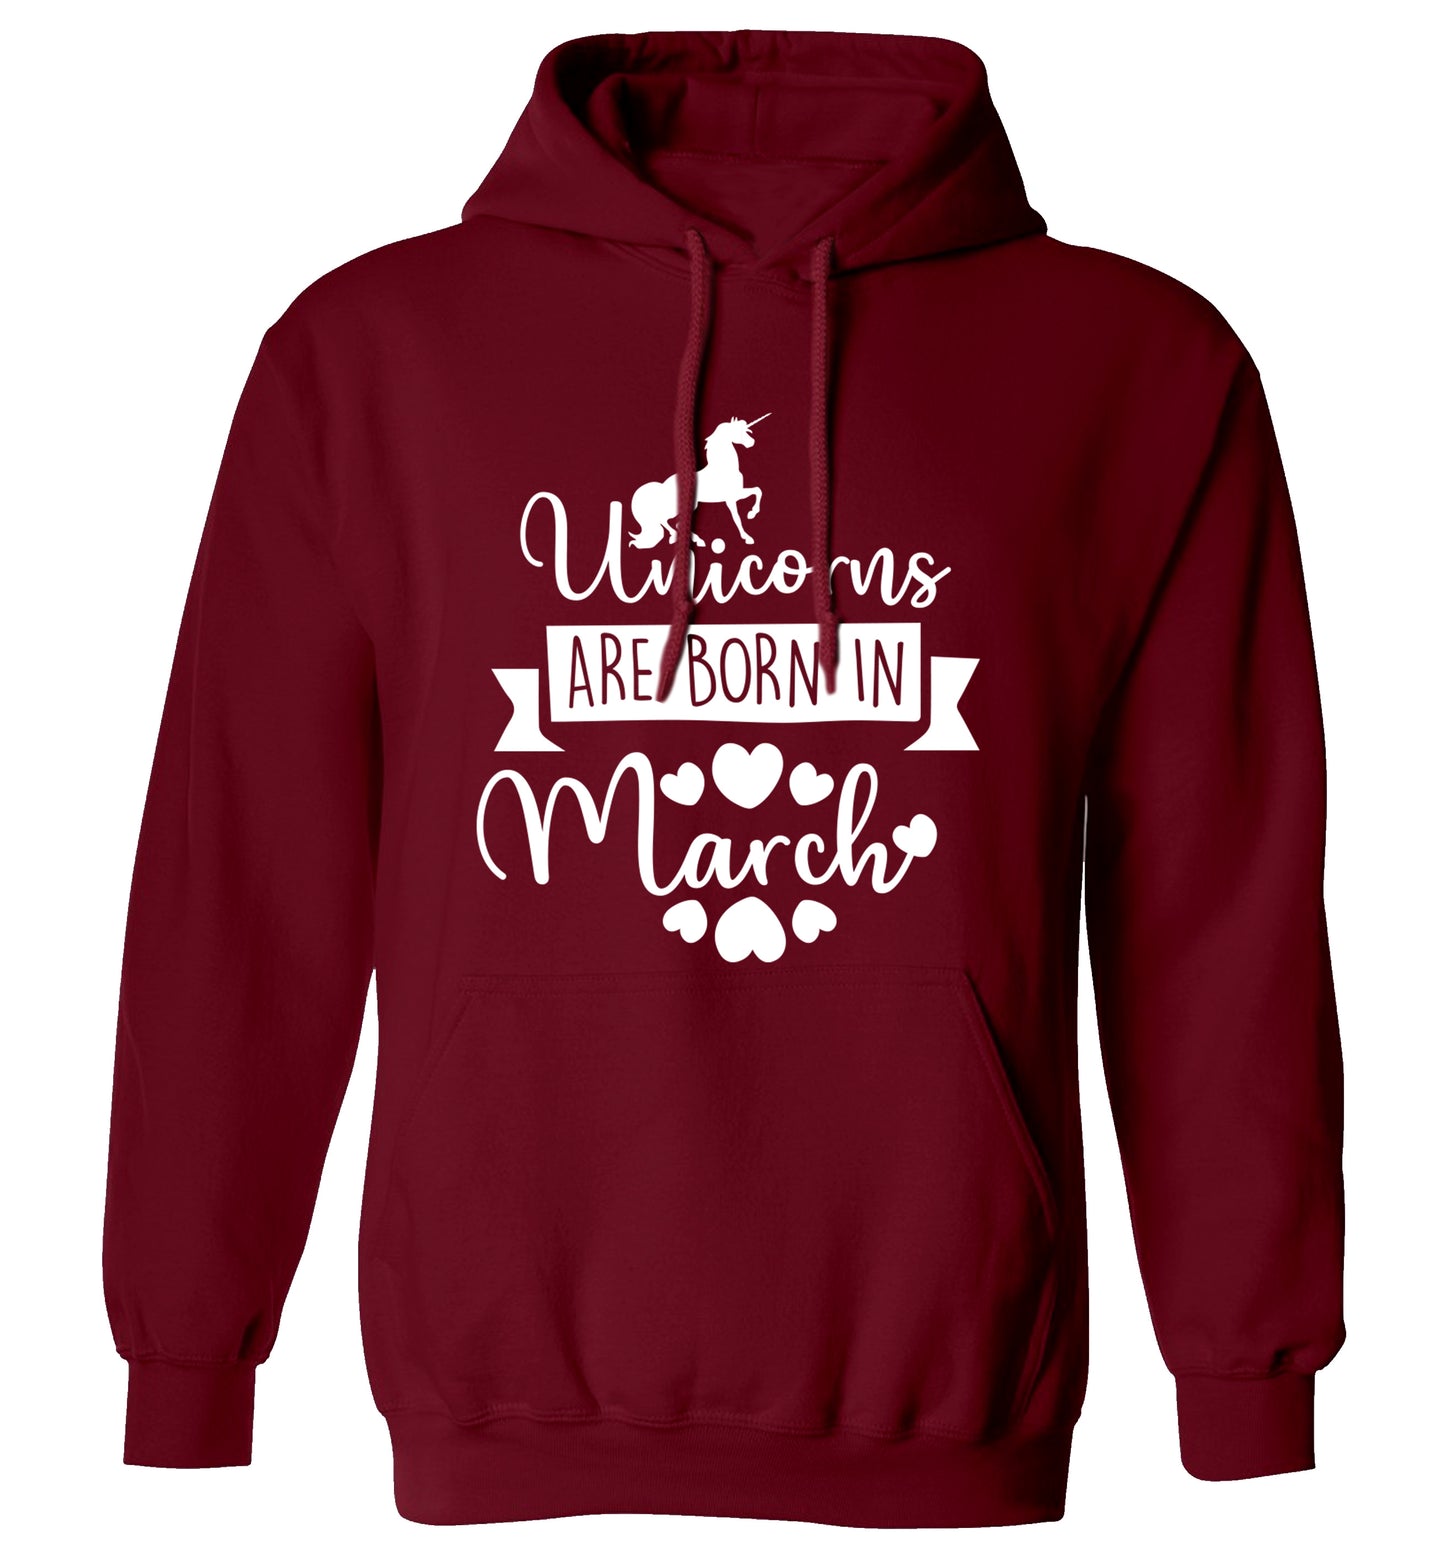 Unicorns are born in March adults unisex maroon hoodie 2XL